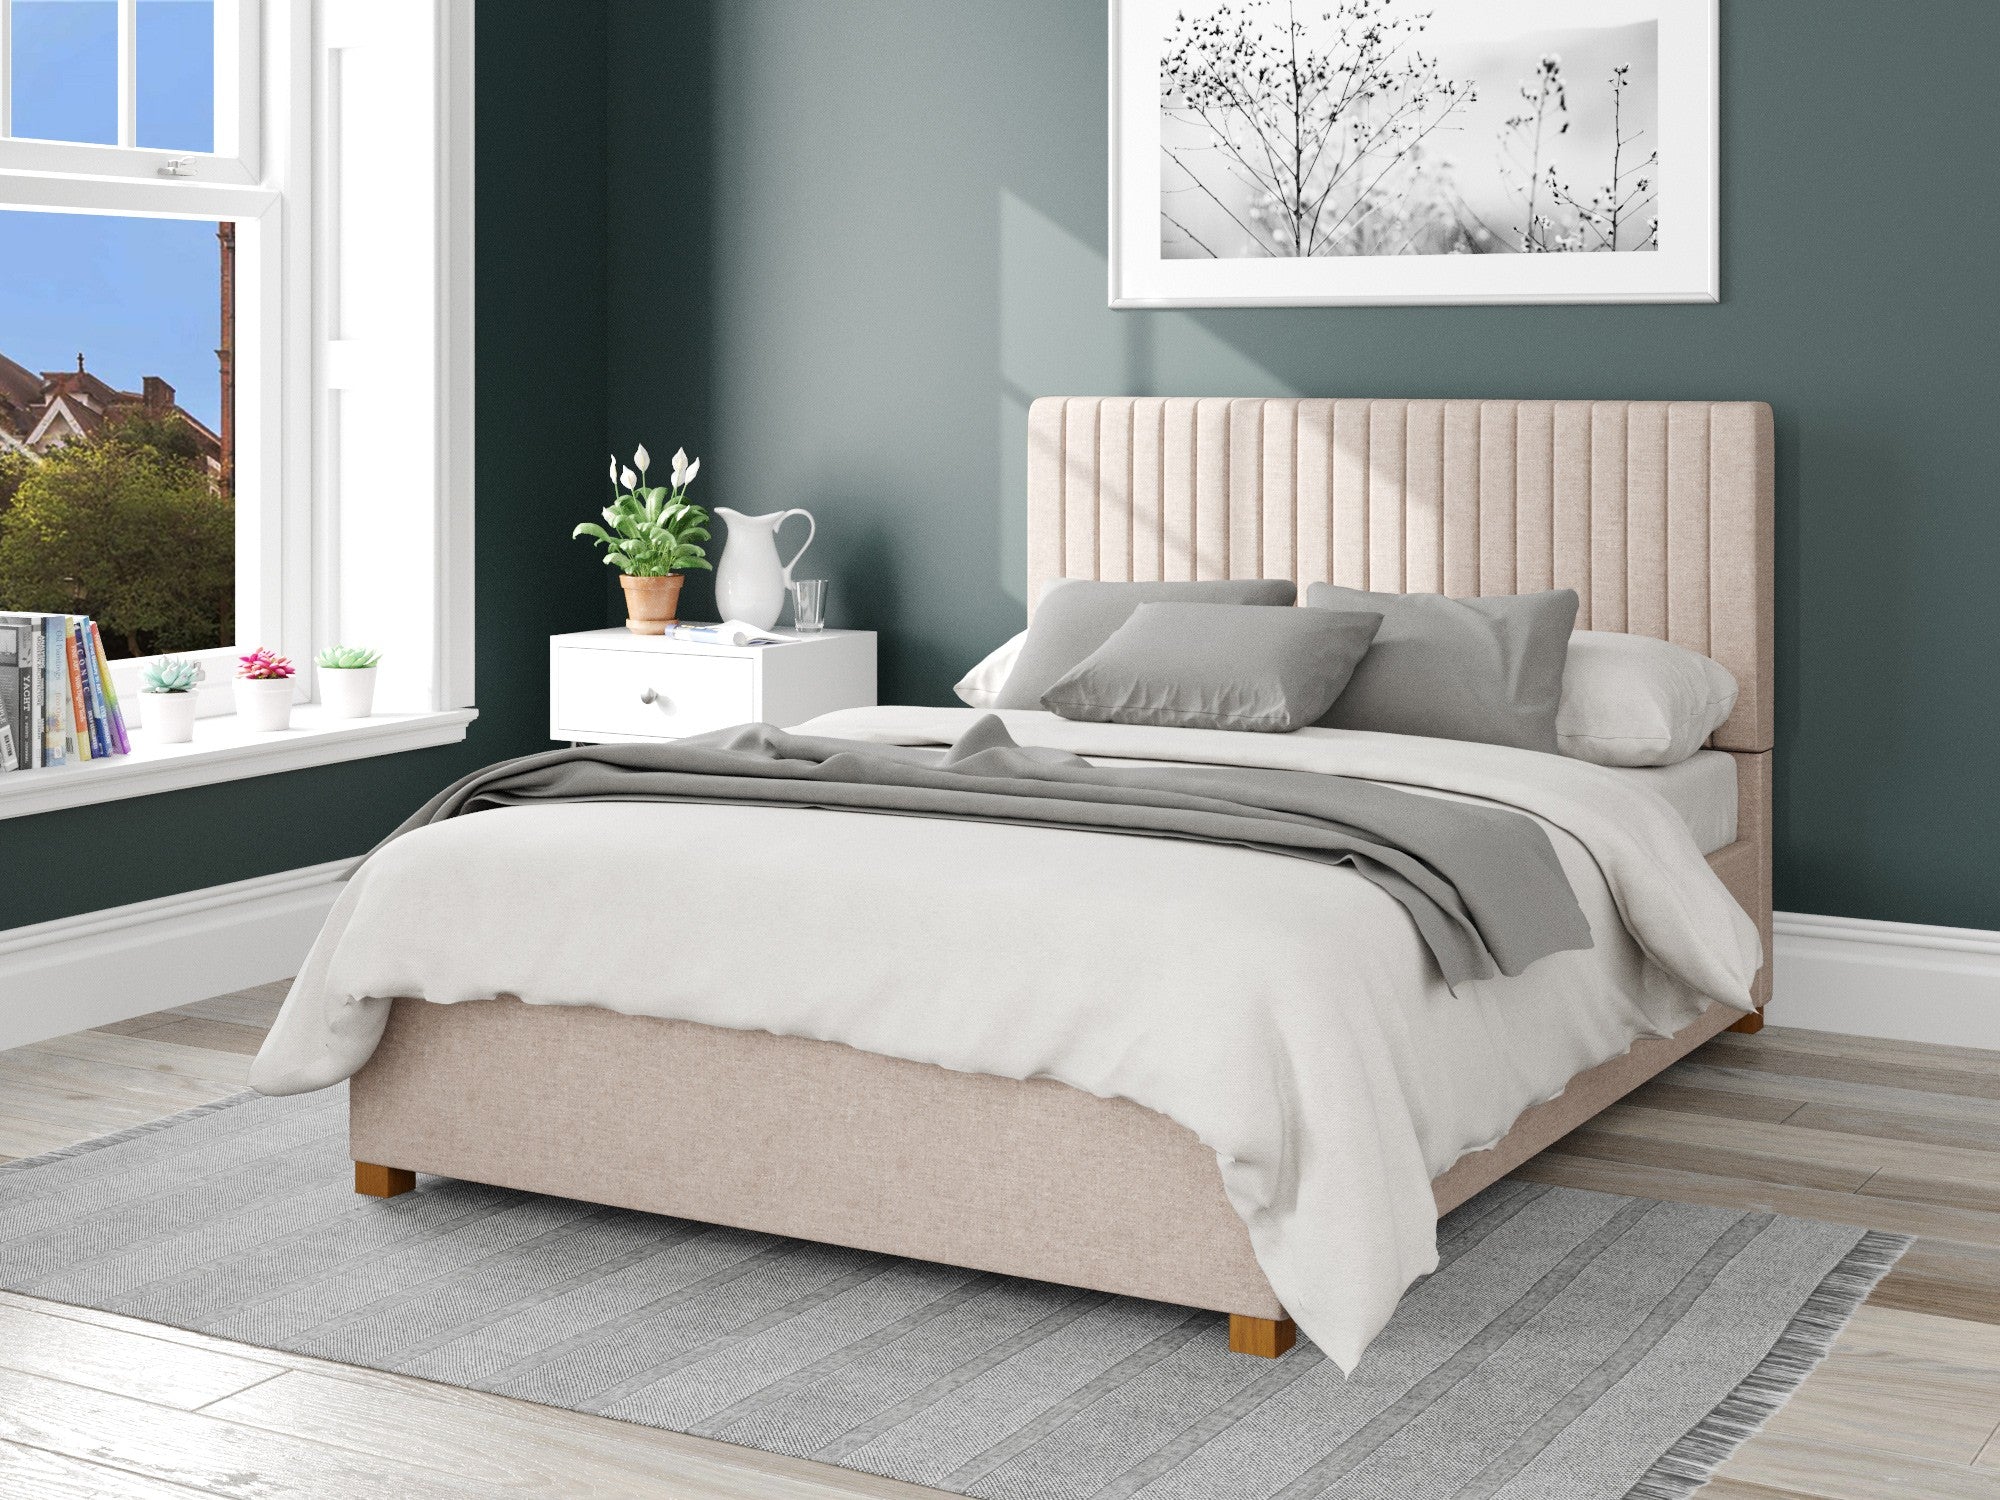 Grant Upholstered Ottoman Bed - Saxon Twill - Natural